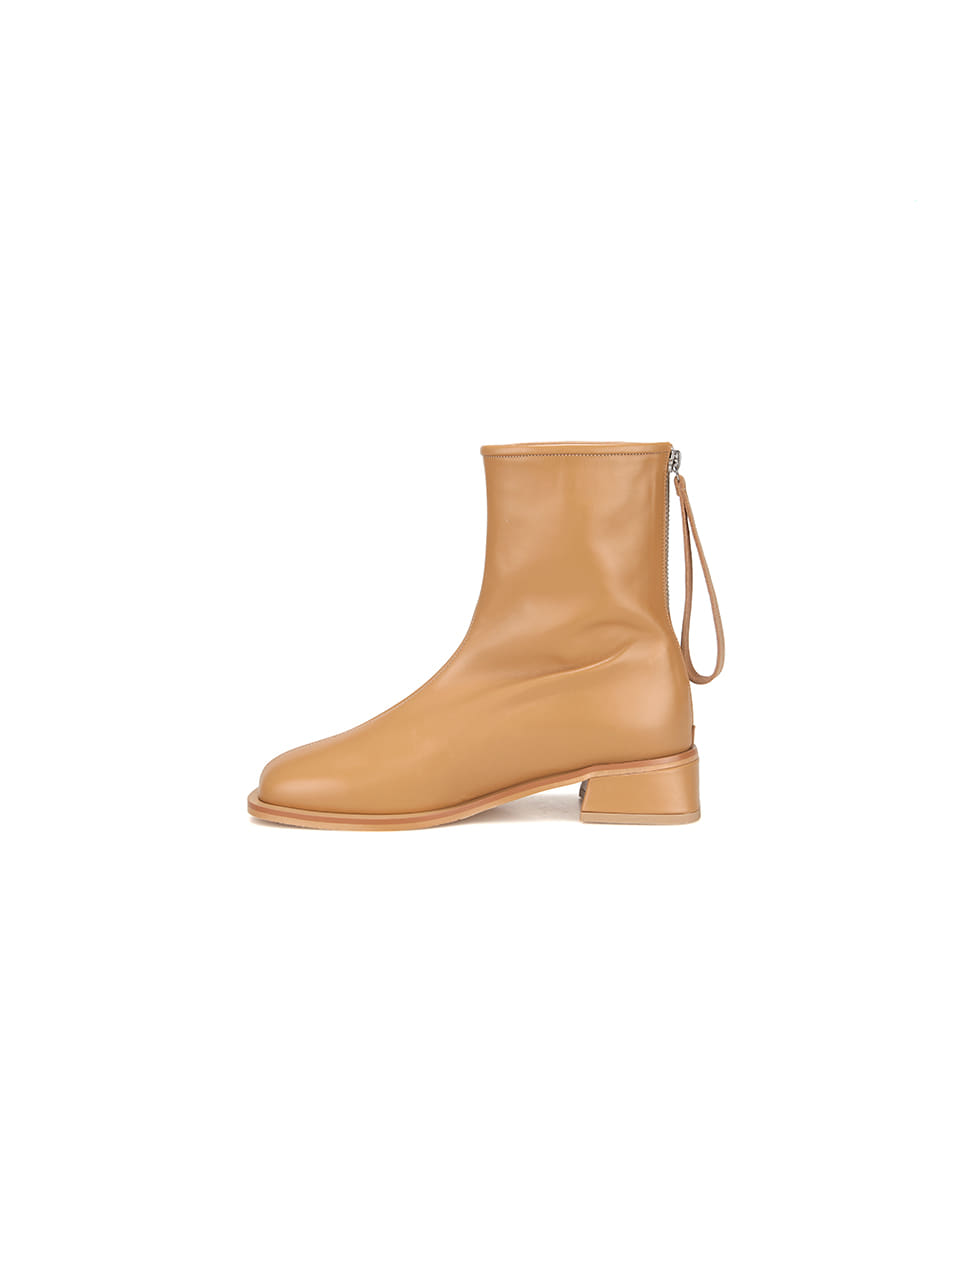 Zip Ankle Boots_21519_camelbeige